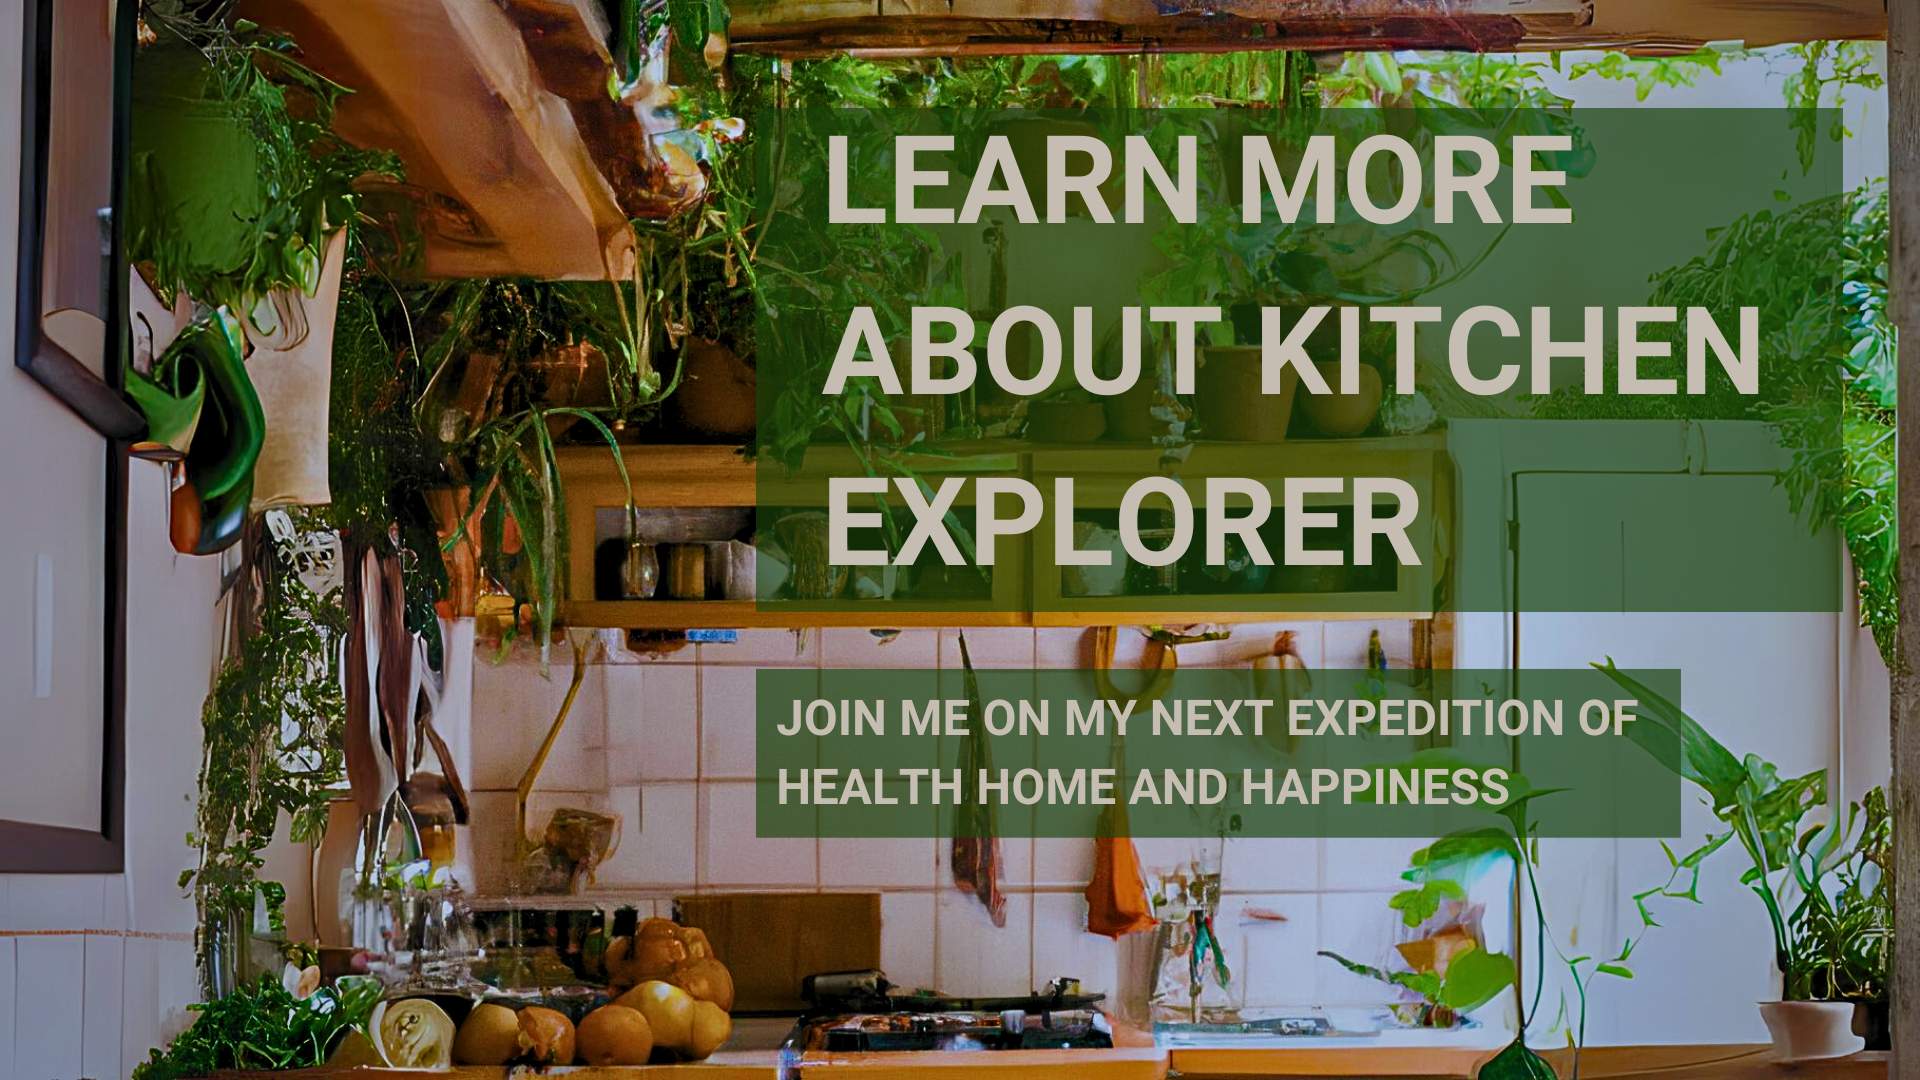 learn about kitchen explorer page